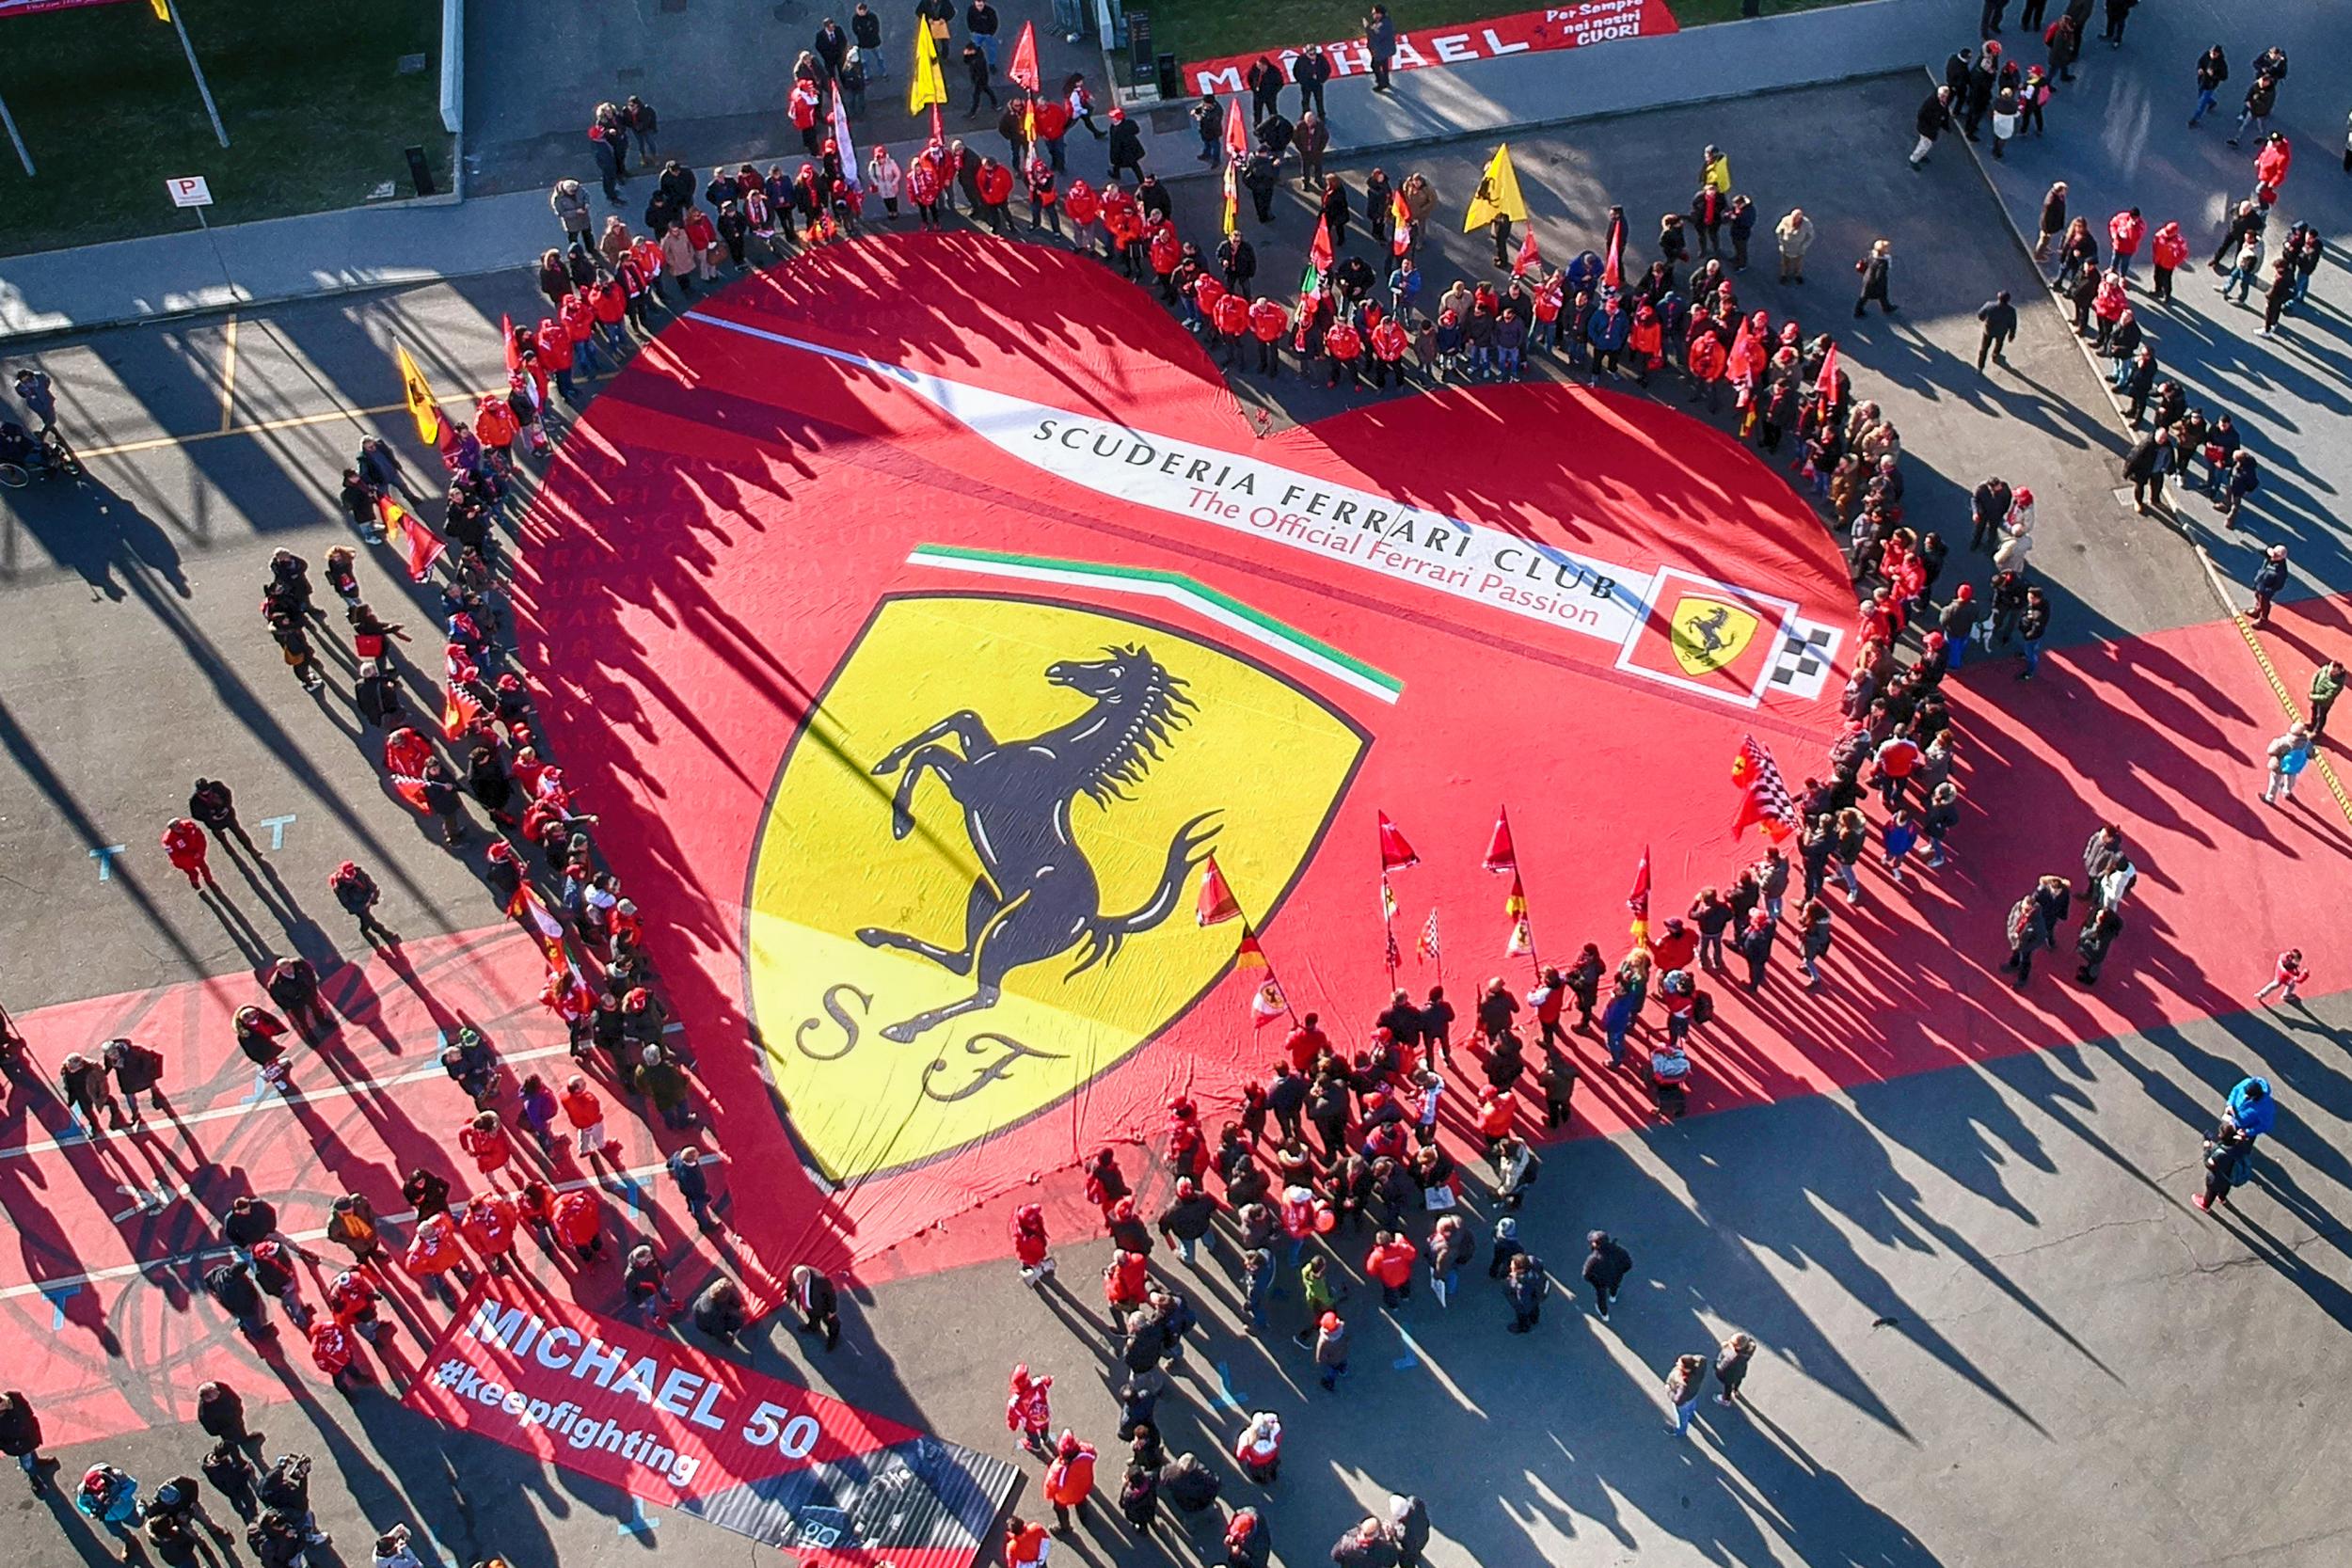 Ferrari pay tribute to Schumacher with this 50th birthday message